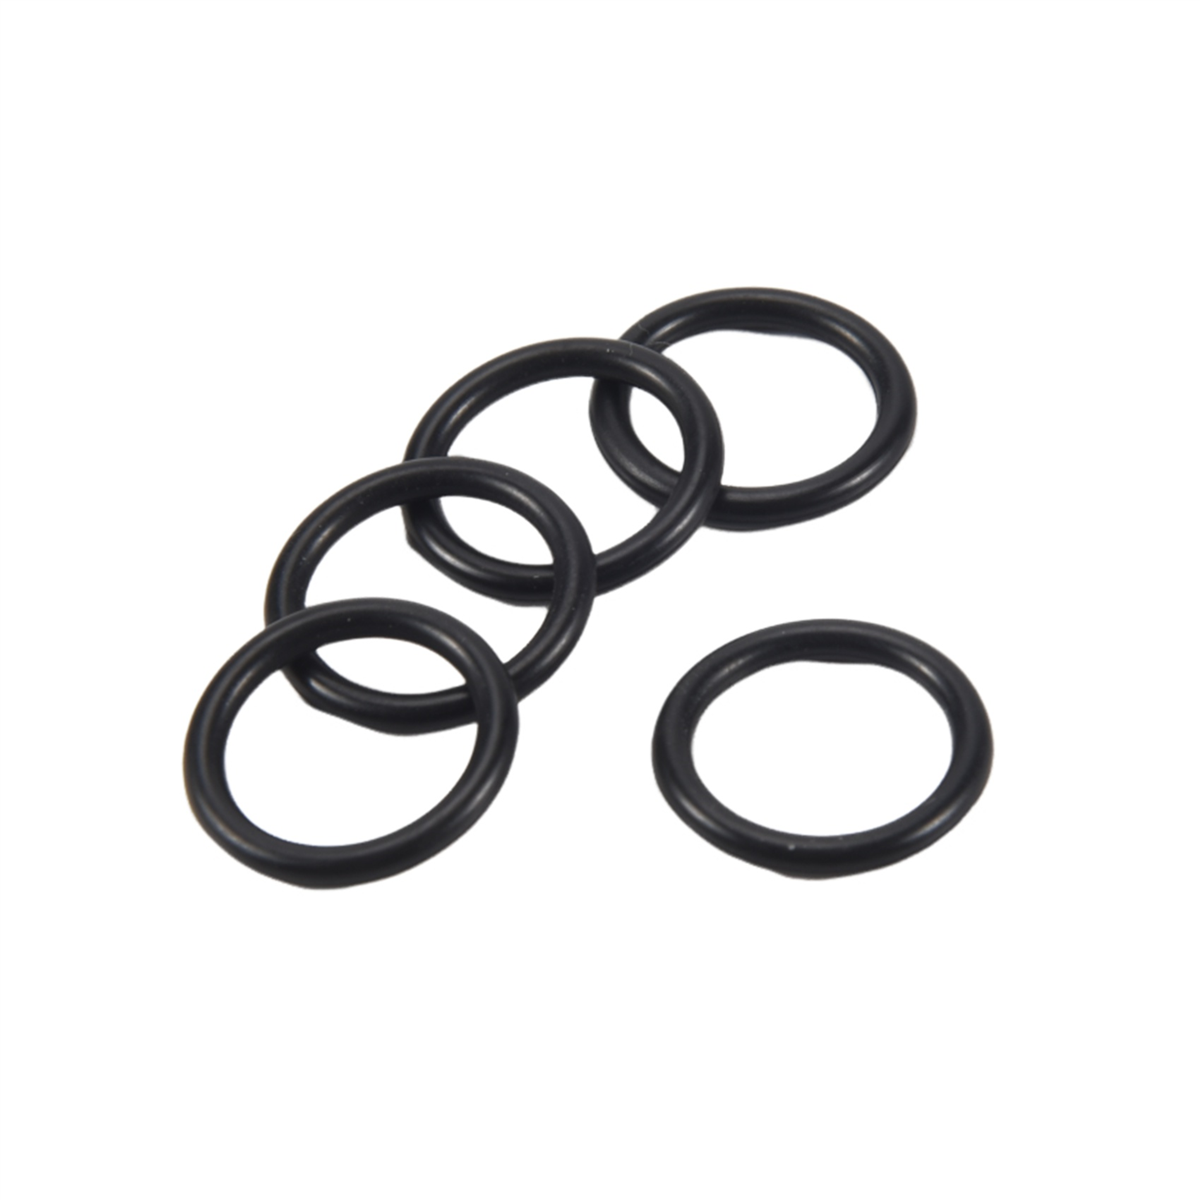 10 pcs Black Rubber Oil Seal O Shaped Rings Seal washers 16 x 12 x 2 mm